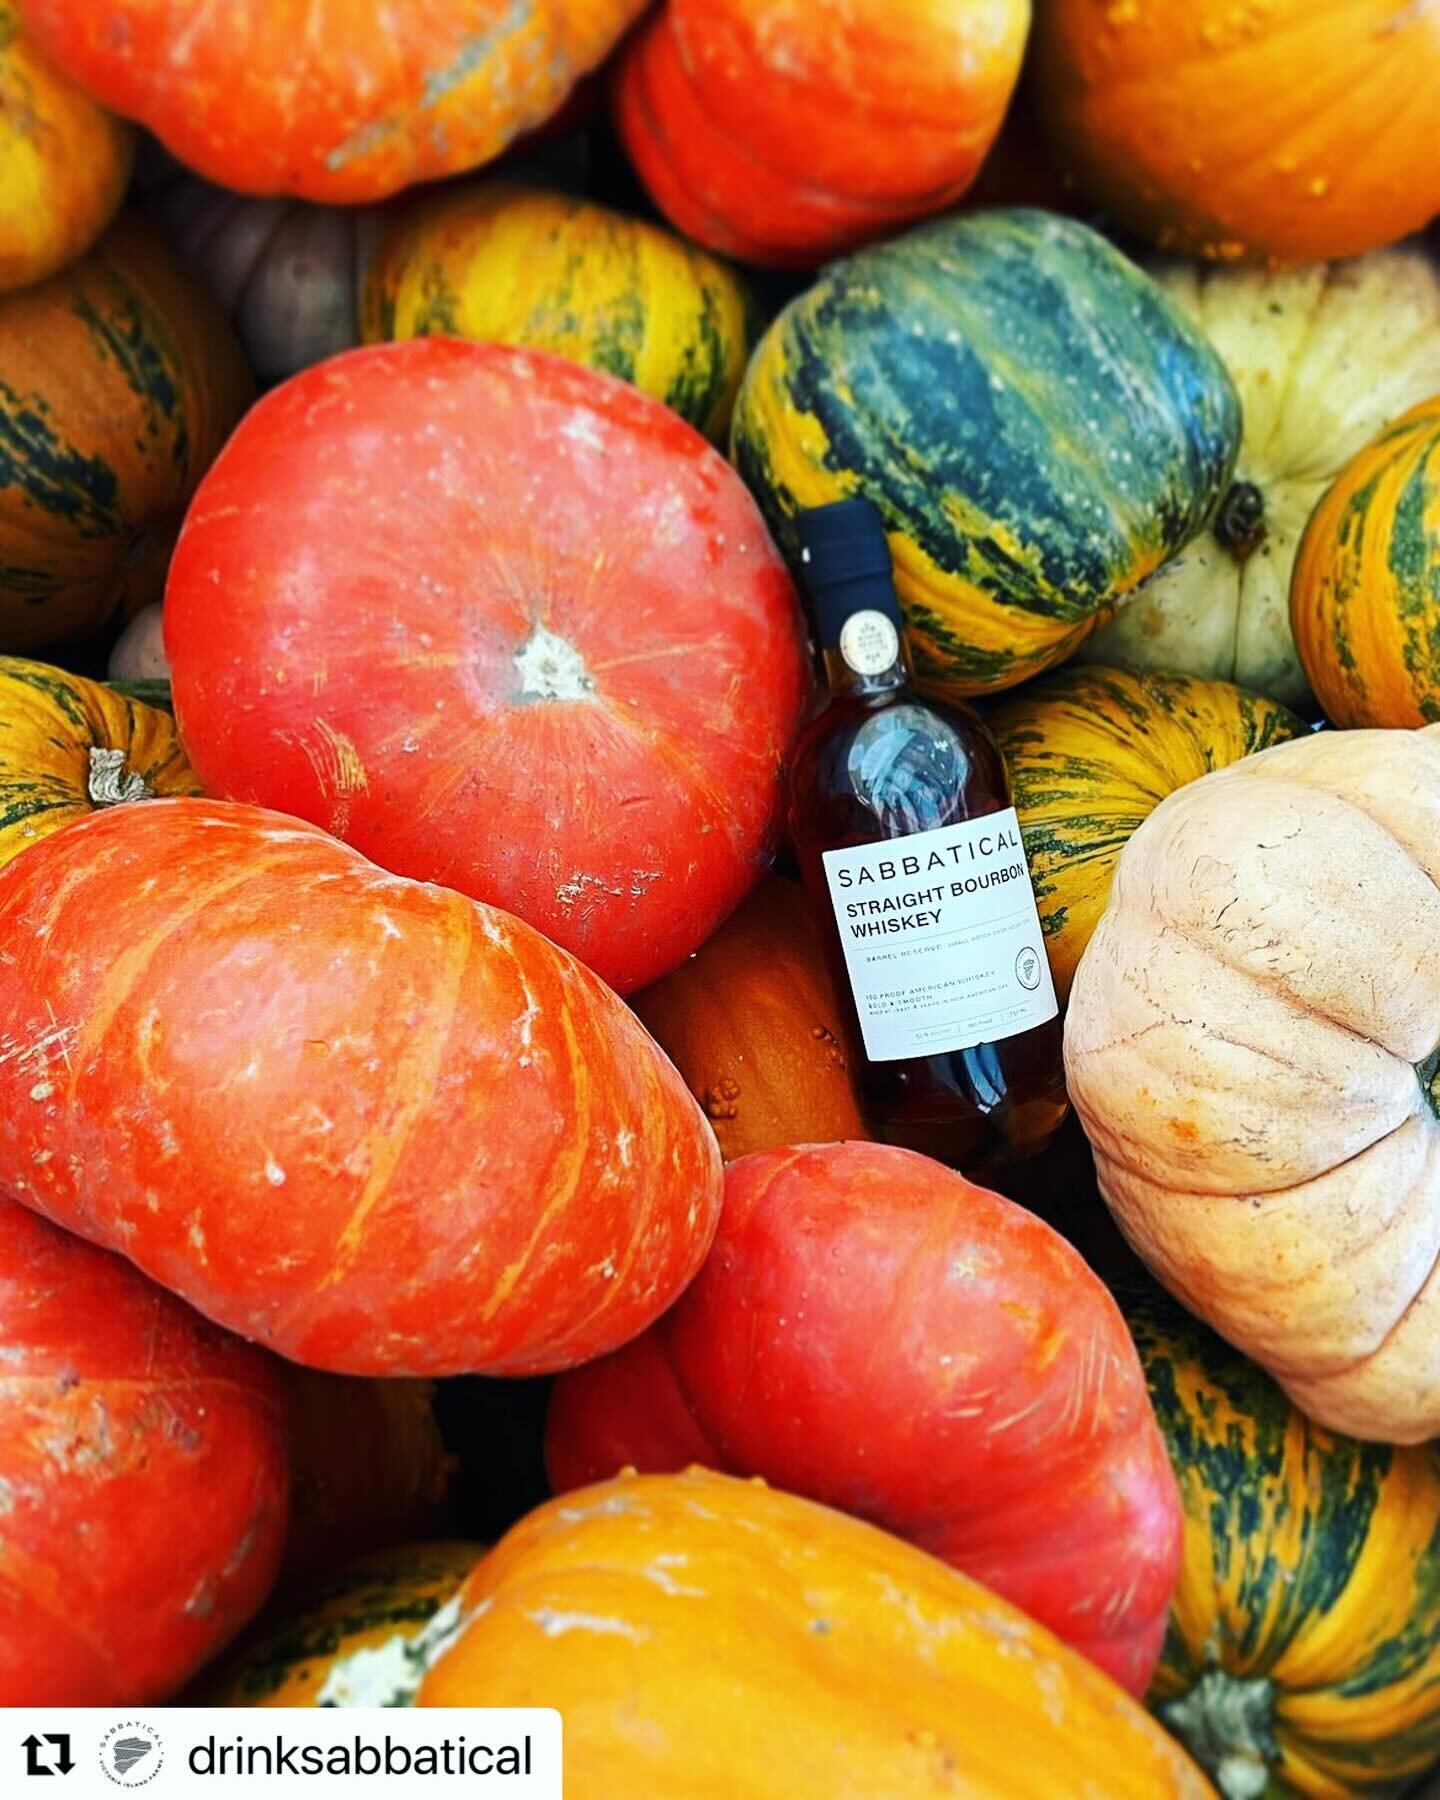 @drinksabbatical
・・・
🥃🎃🍂

It&rsquo;s feeling like the fall season out here with a fresh delivery of @victoriaislandfarms grown pumpkins to go with our farm-made whiskey!